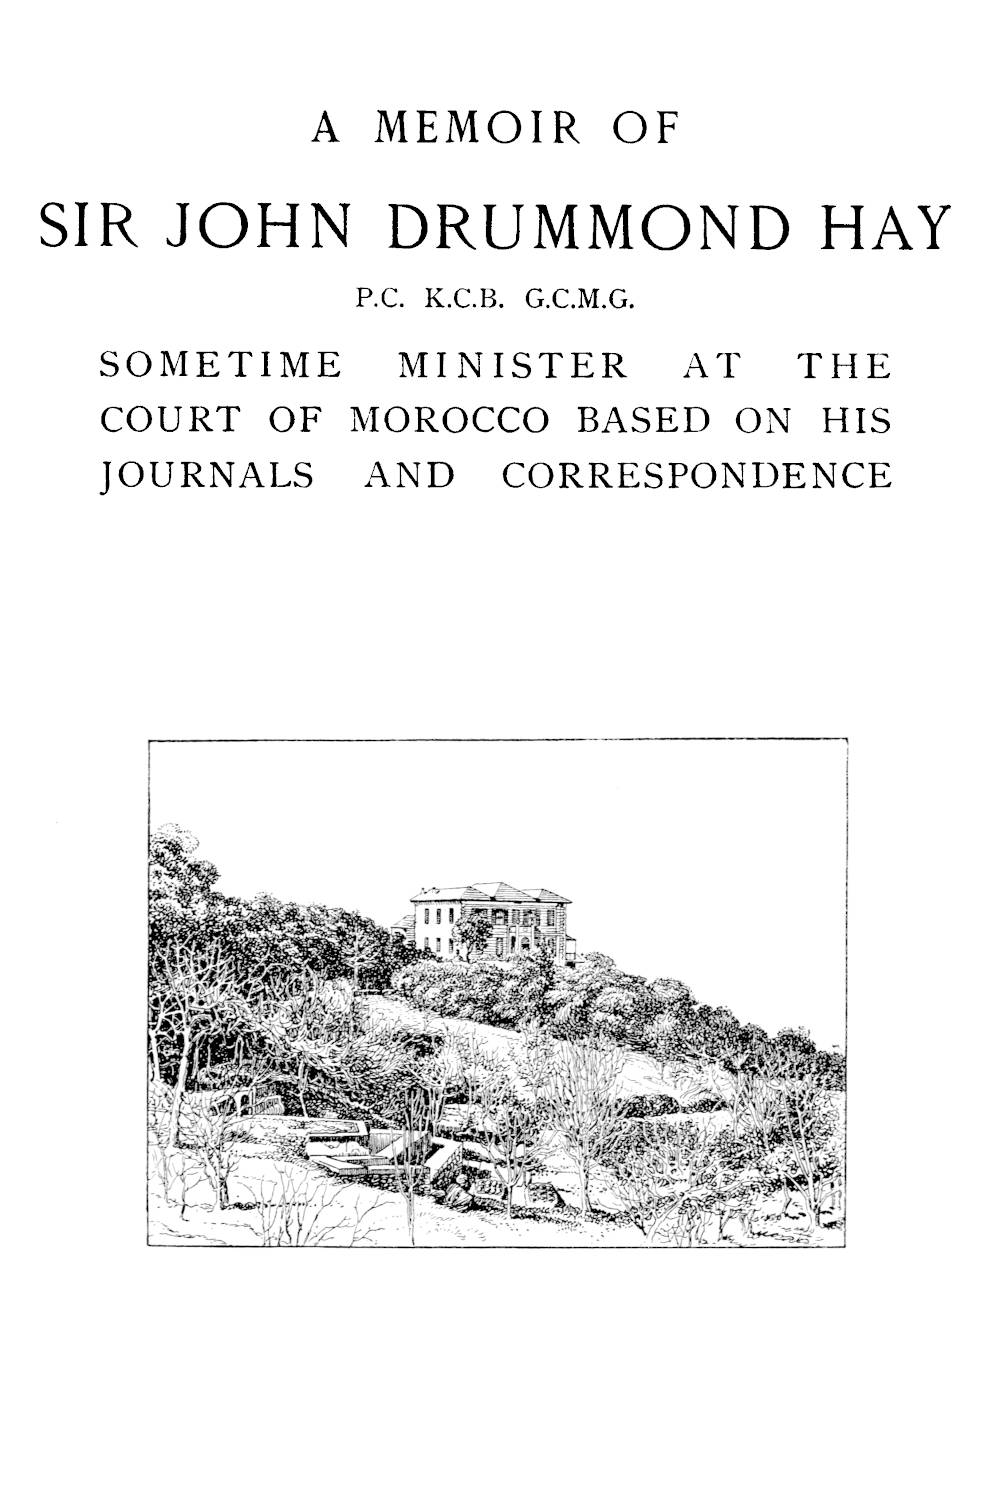 A memoir of Sir John Drummond Hay, P.C., K.C.B., G.C.M.G., sometime minister at the court of Morrocco